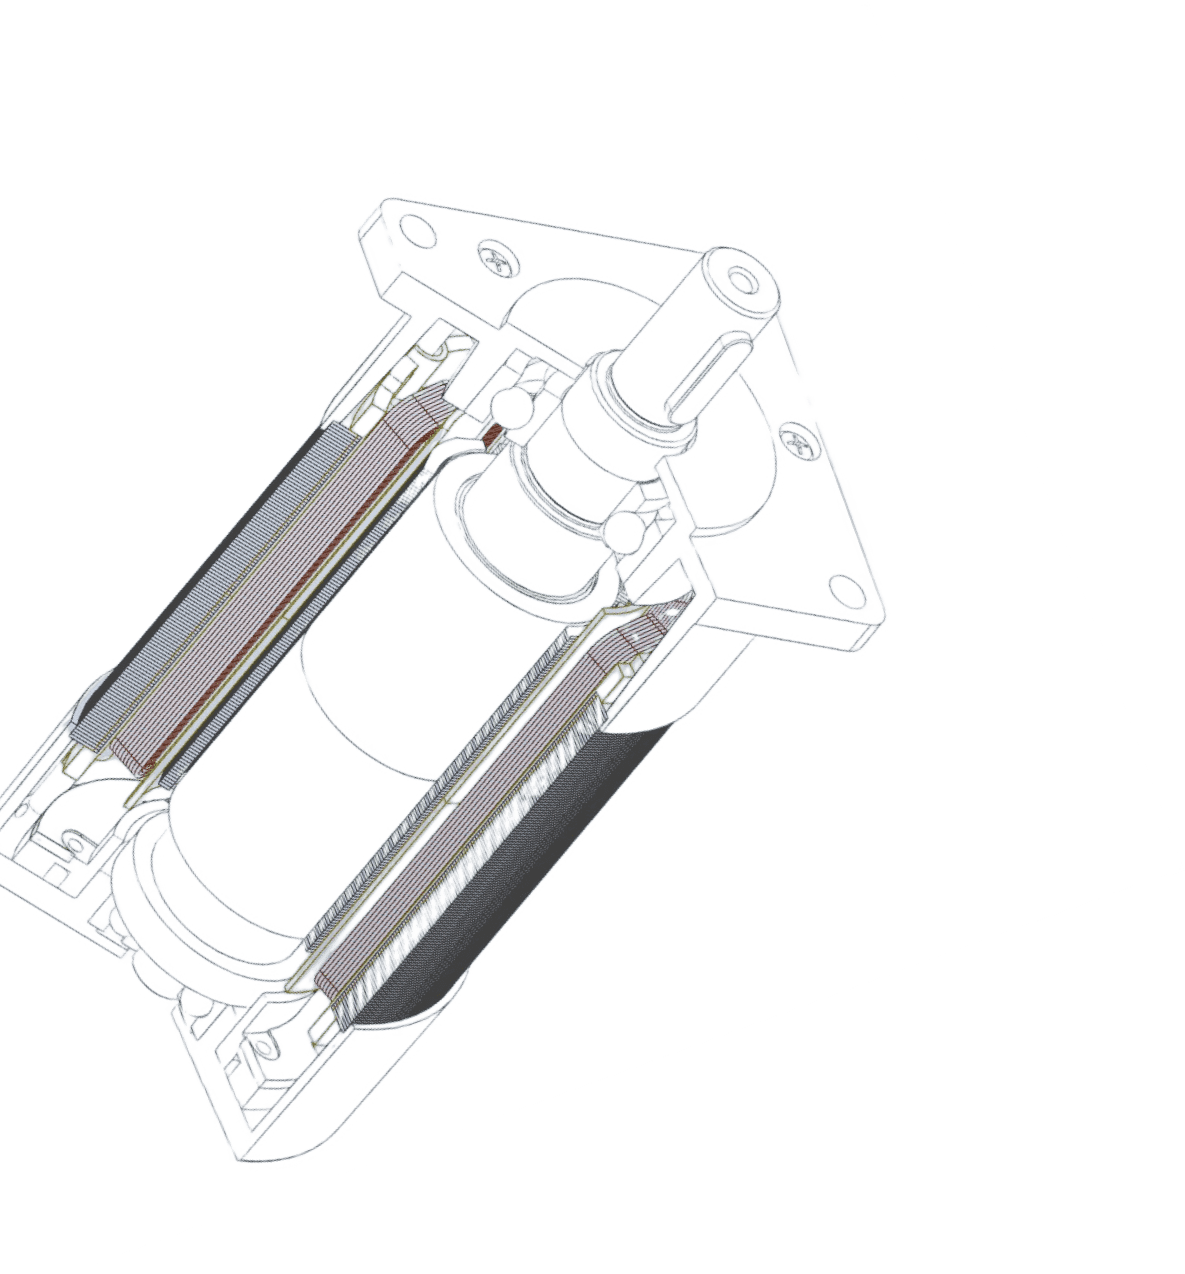 BLDC motor seciton wireframe view